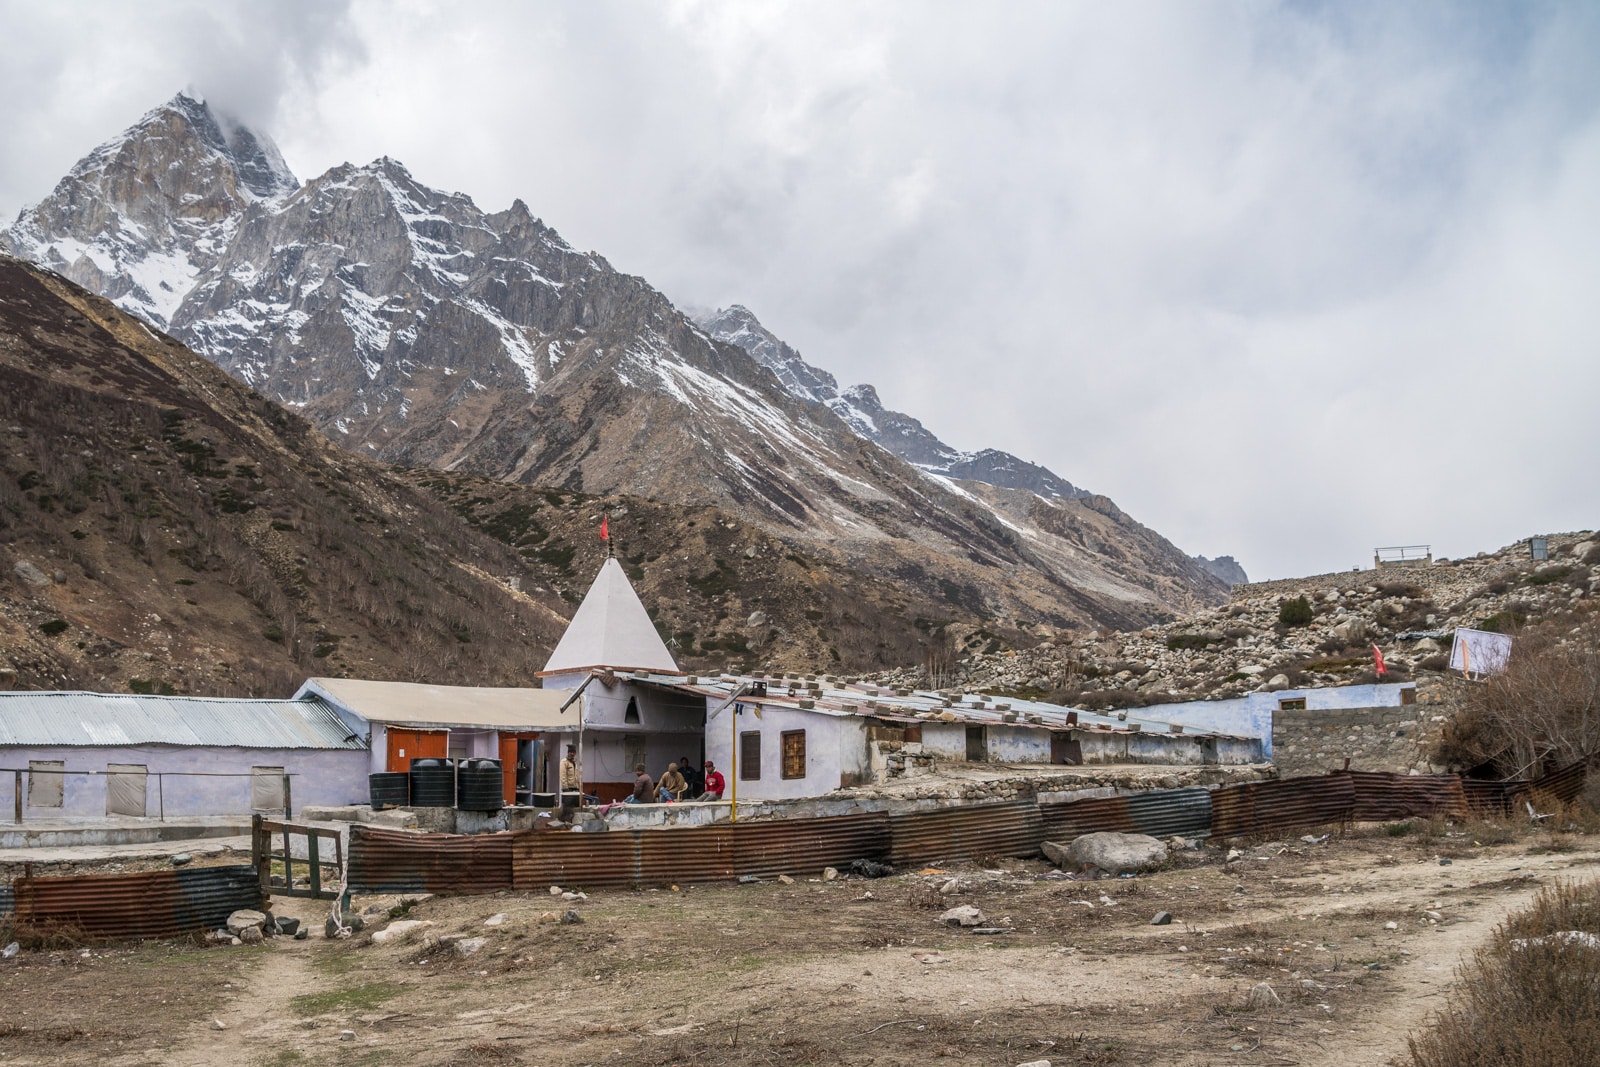 Lal Baba Ashram in Bhojwasa with mountains in the background